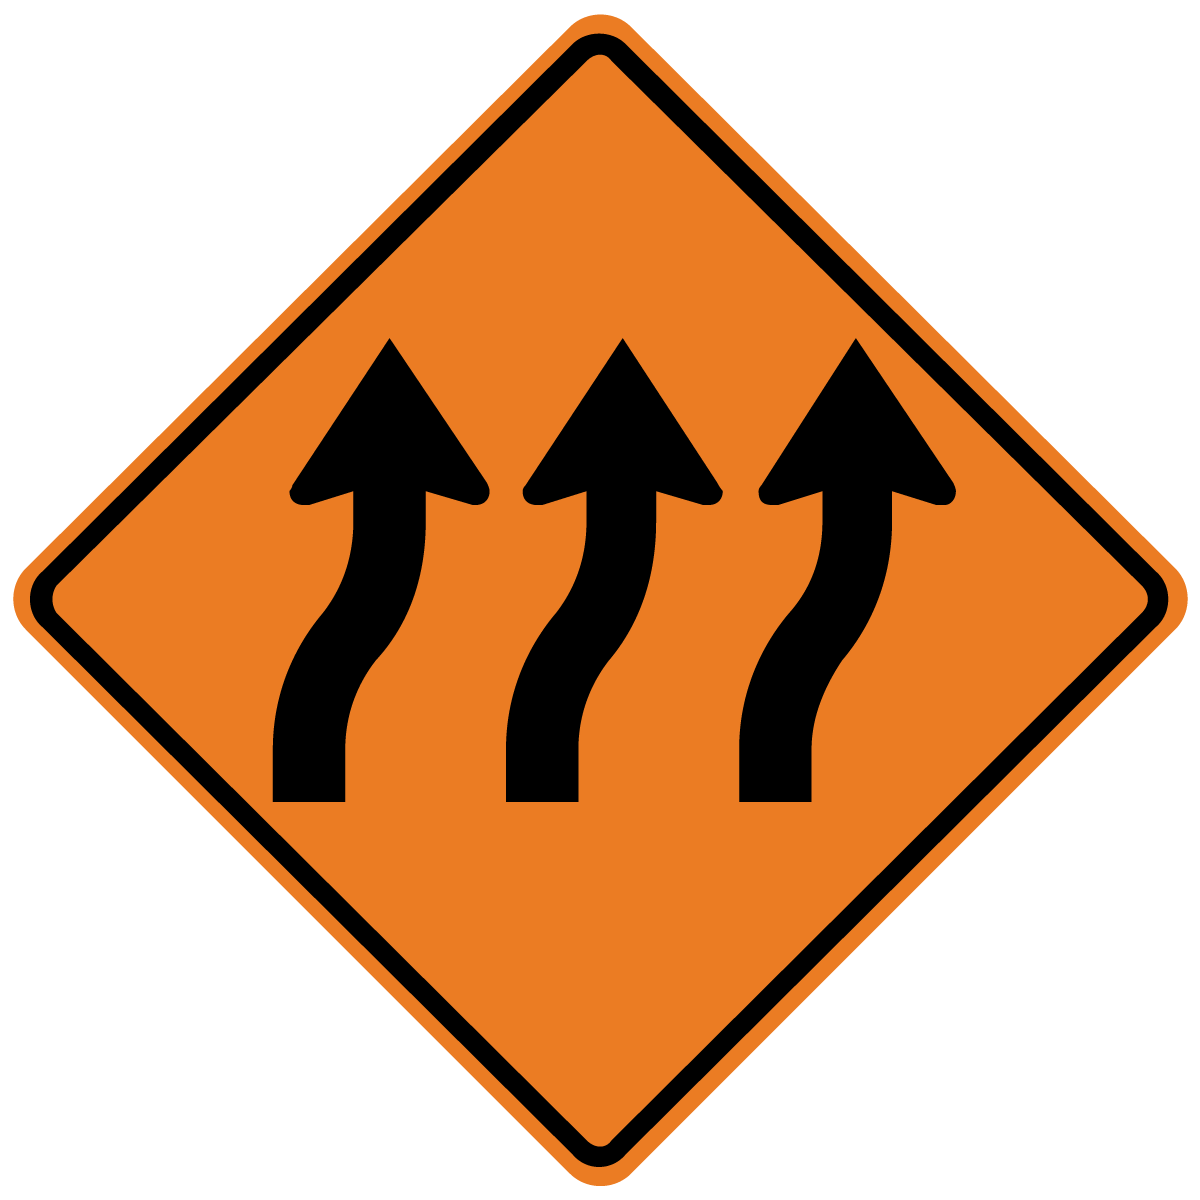 W1-4c (Left or Right)